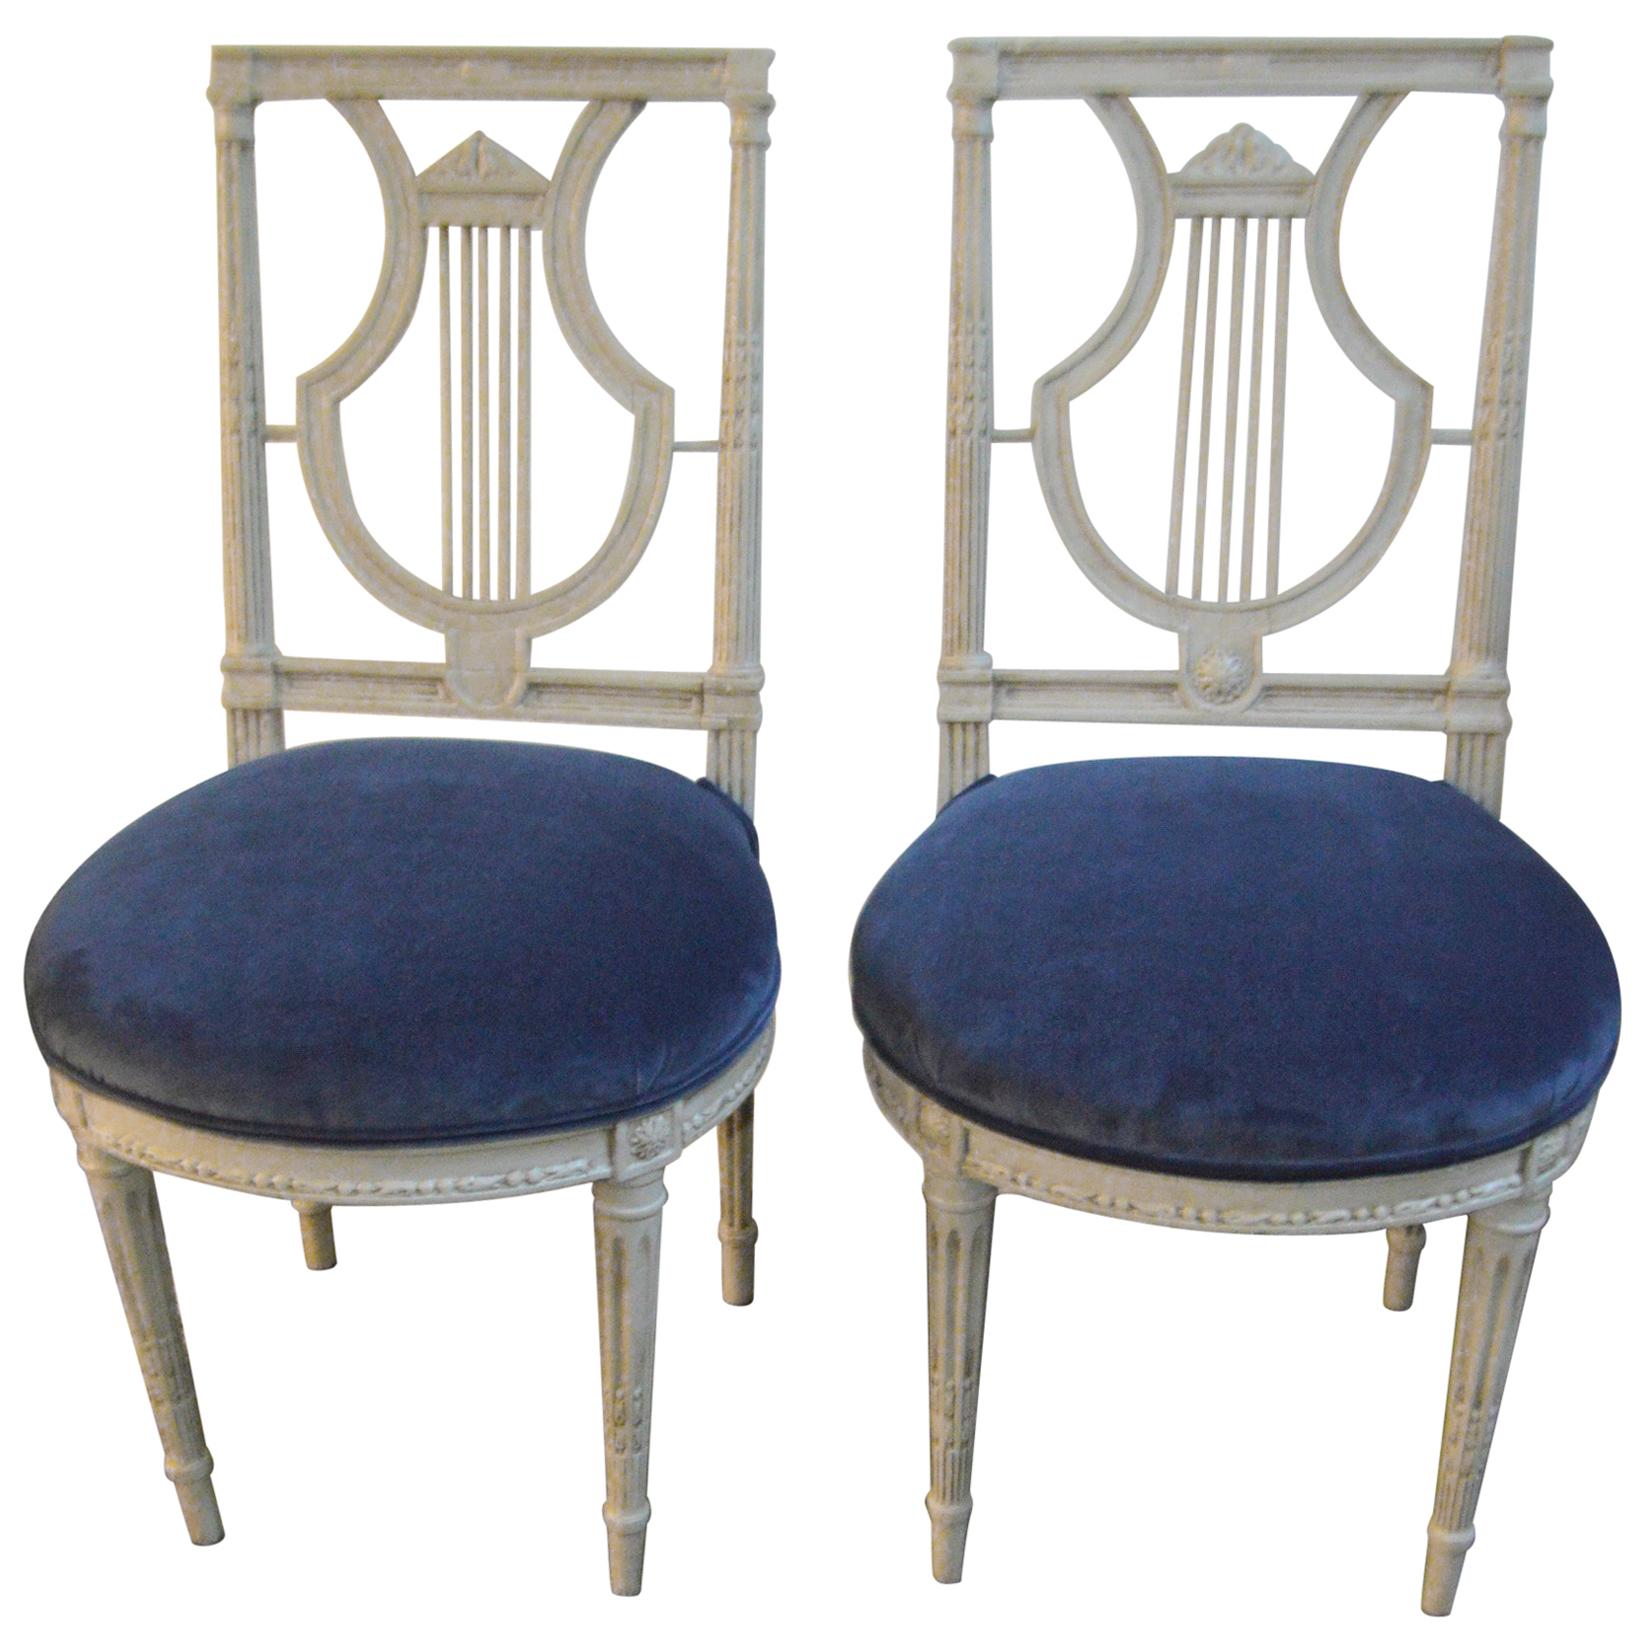 Pair of Louis XVI Style Painted Grey Lyre Back Side Chair, Blue Velvet Seat For Sale